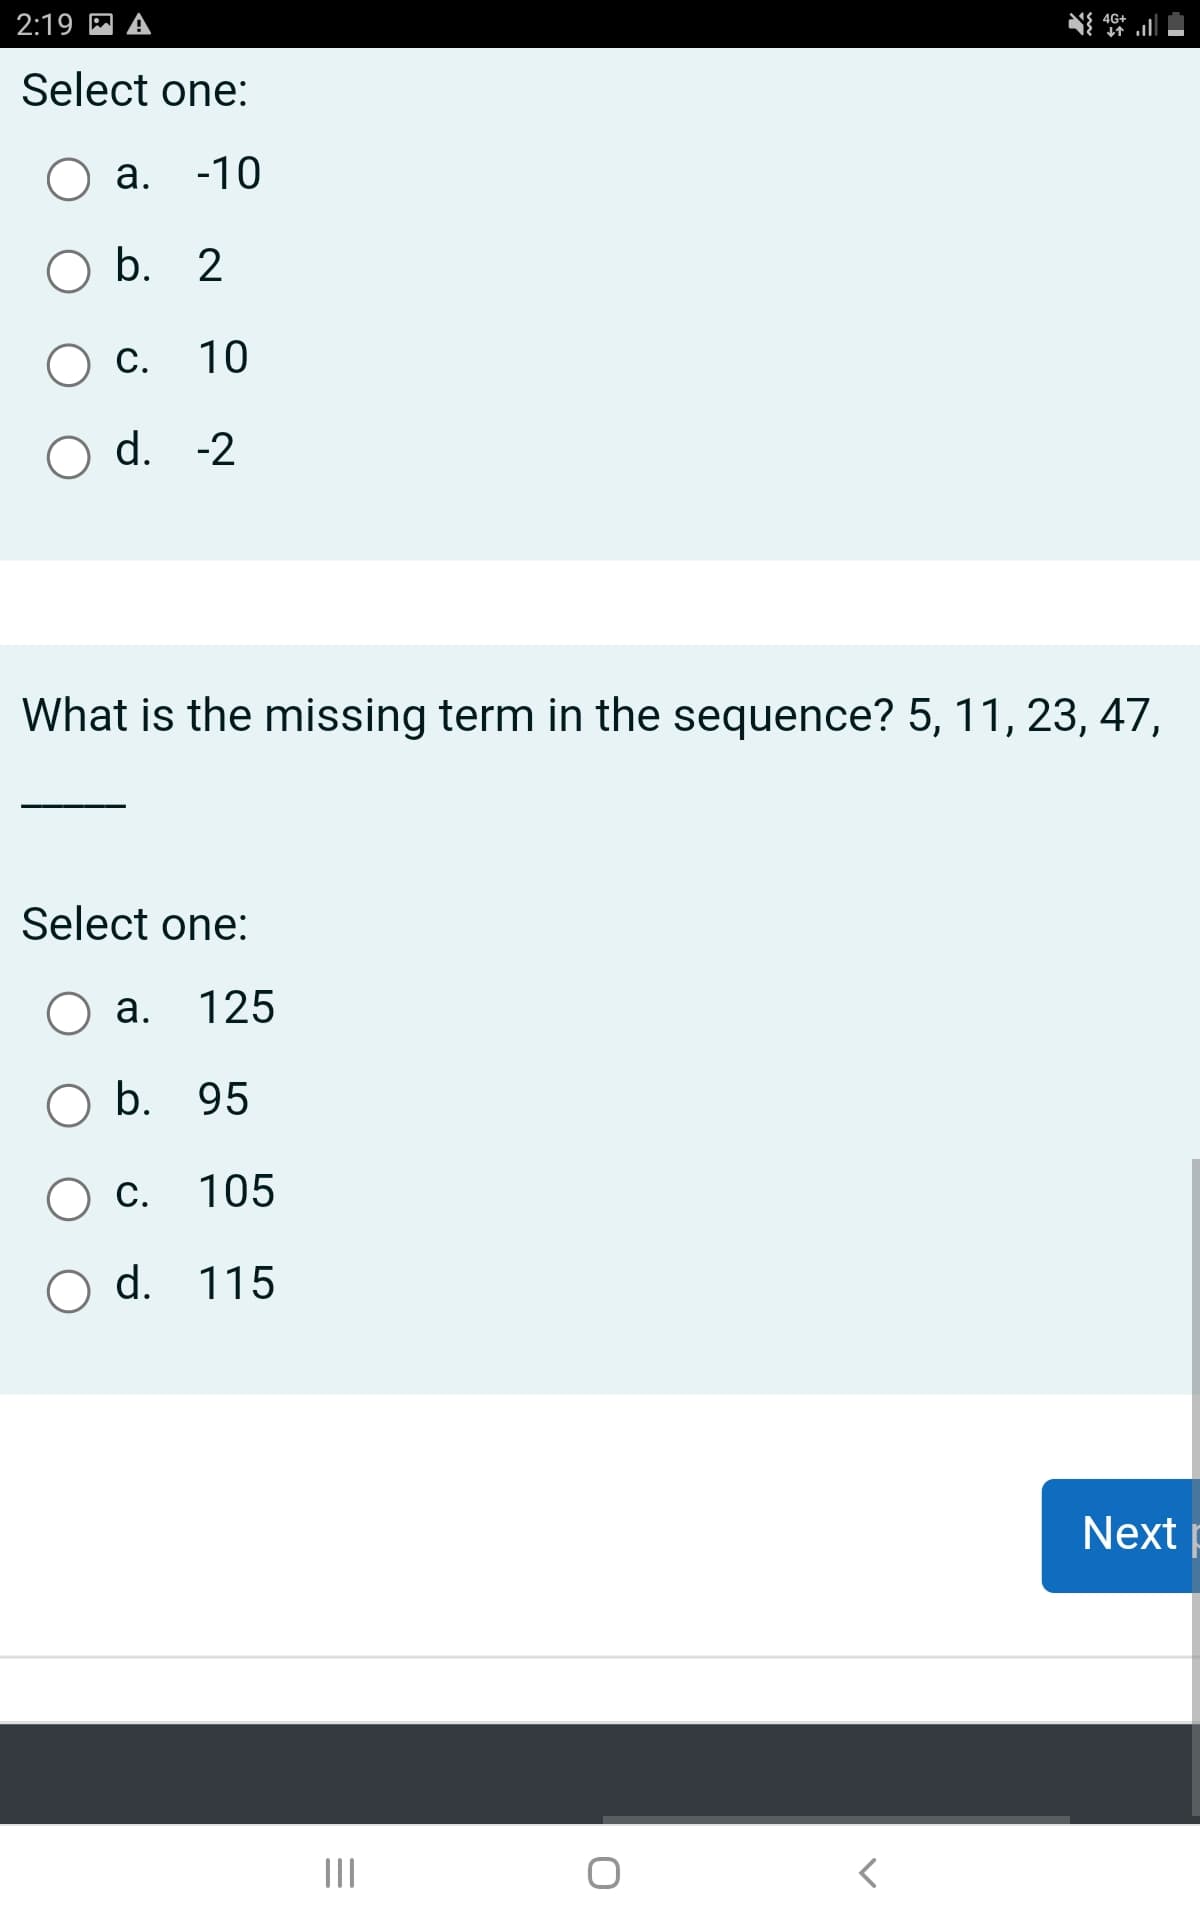 2:19
Select one:
a. -10
O b. 2
O c.
10
d. -2
What is the missing term in the sequence? 5, 11, 23, 47,
Select one:
O a. 125
O b. 95
c. 105
O d. 115
|||
4G+
↓↑
<
Next p